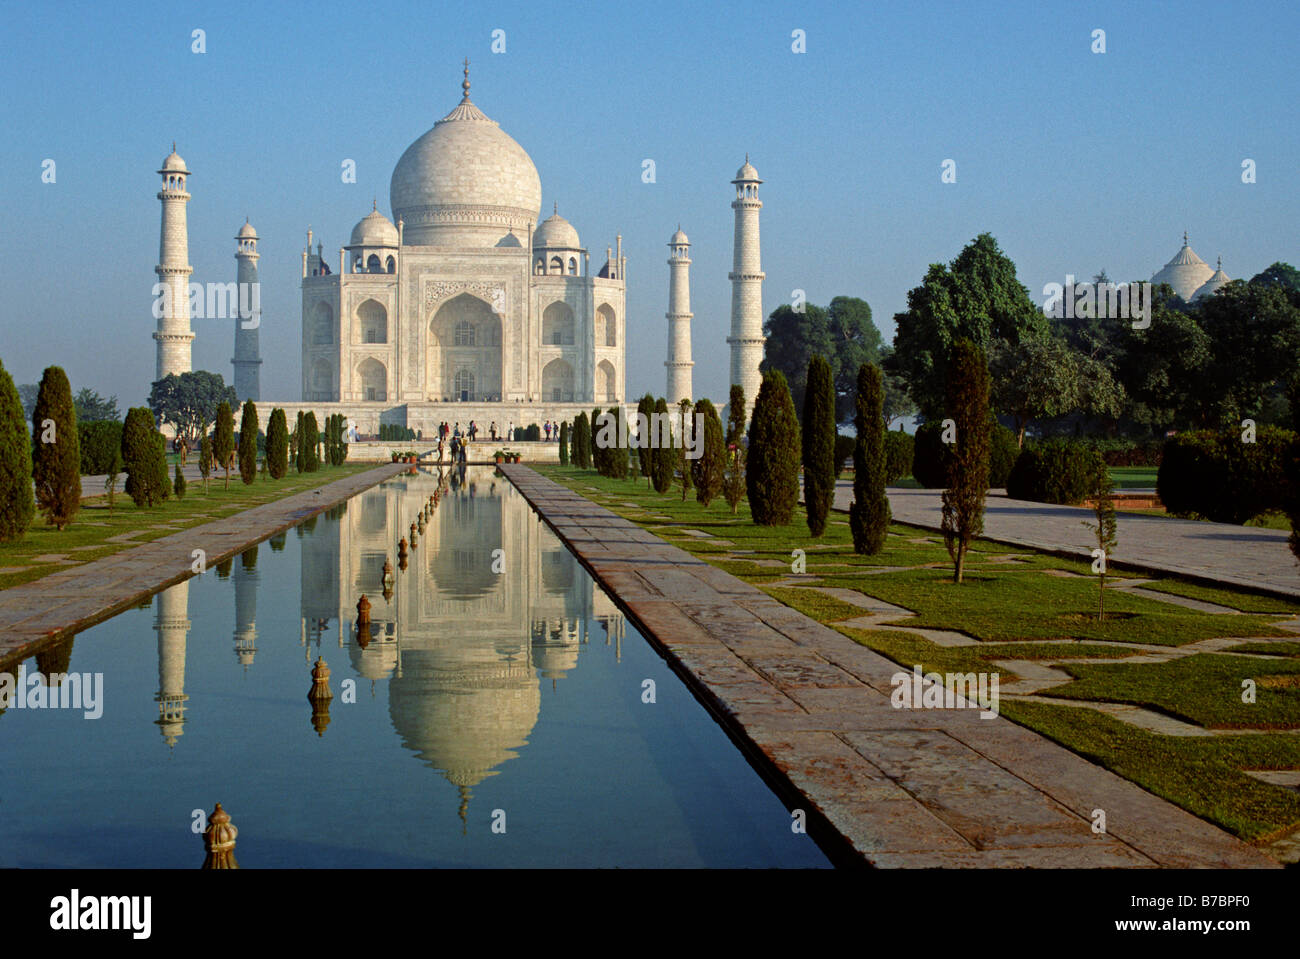 The TAJ MAHAL built by emperor Shahjahan for his wife in 1653 REFLECTS in a POOL AGRA INDIA Stock Photo